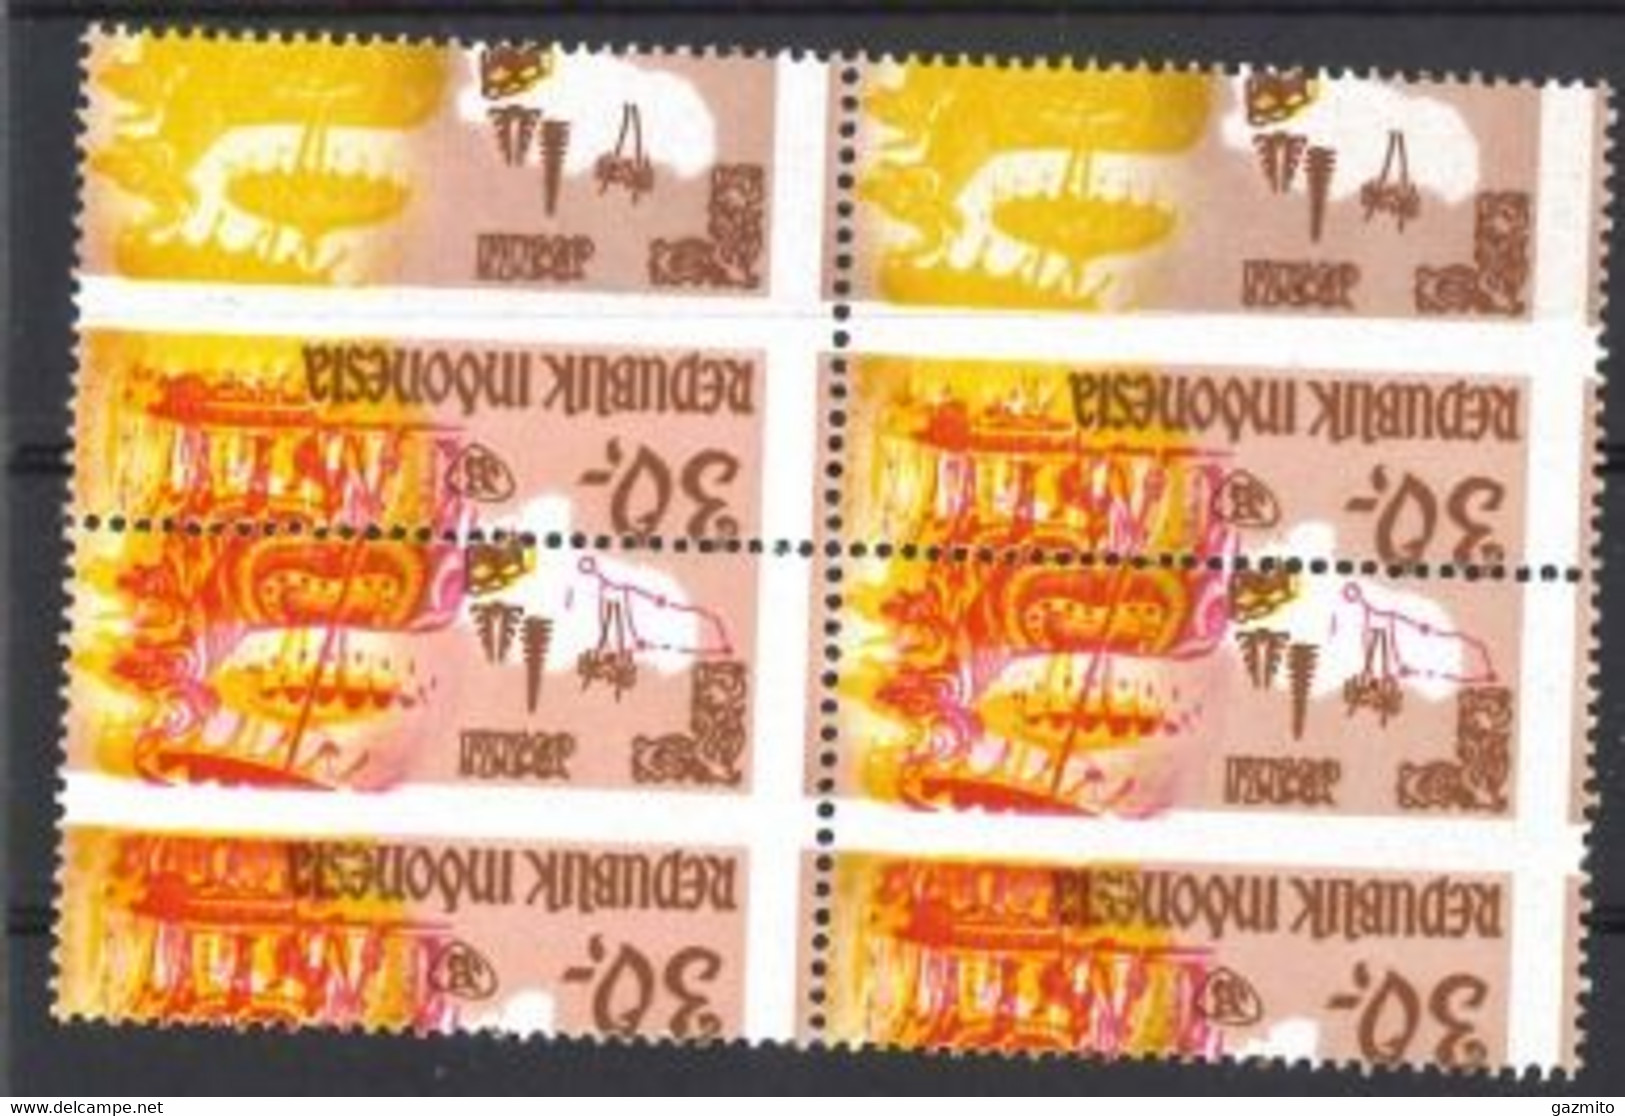 Indonesia 1969, Tourism In Bali, COLOR CUTTING ERROR - Oddities On Stamps